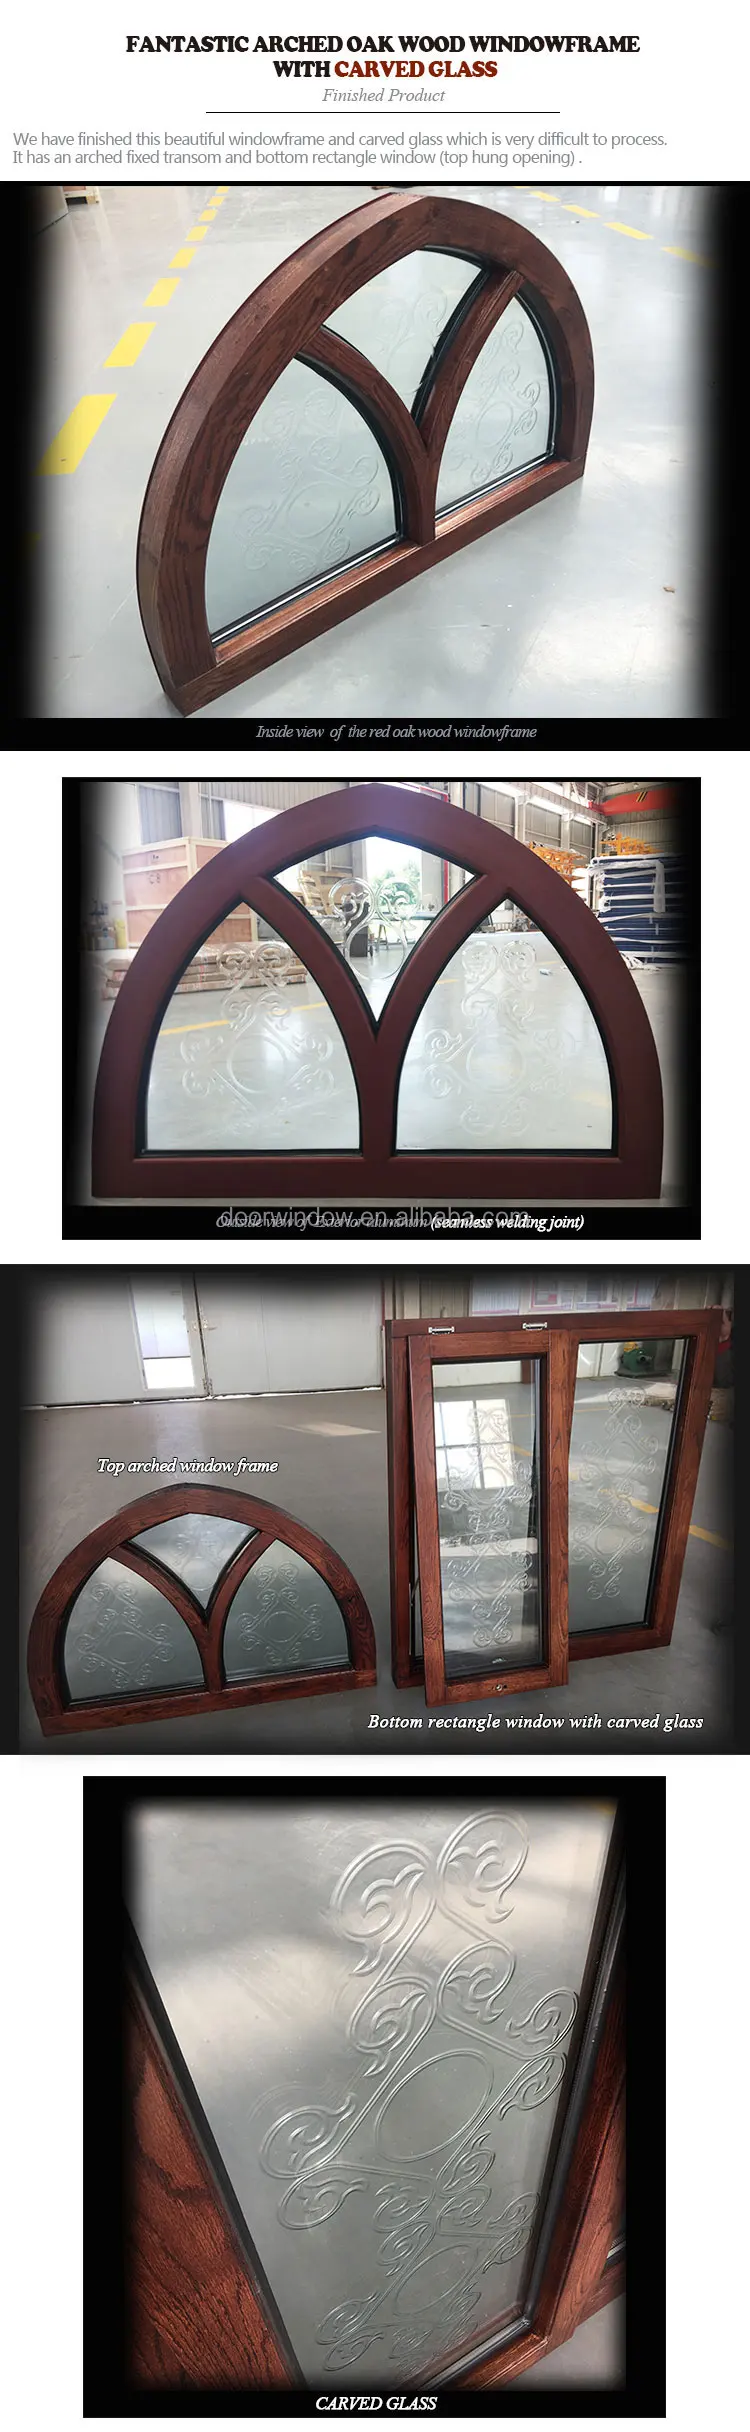 CSA/AAMA/NAMI Certification Aluminum Clad Solid Wood Window With Arched Top